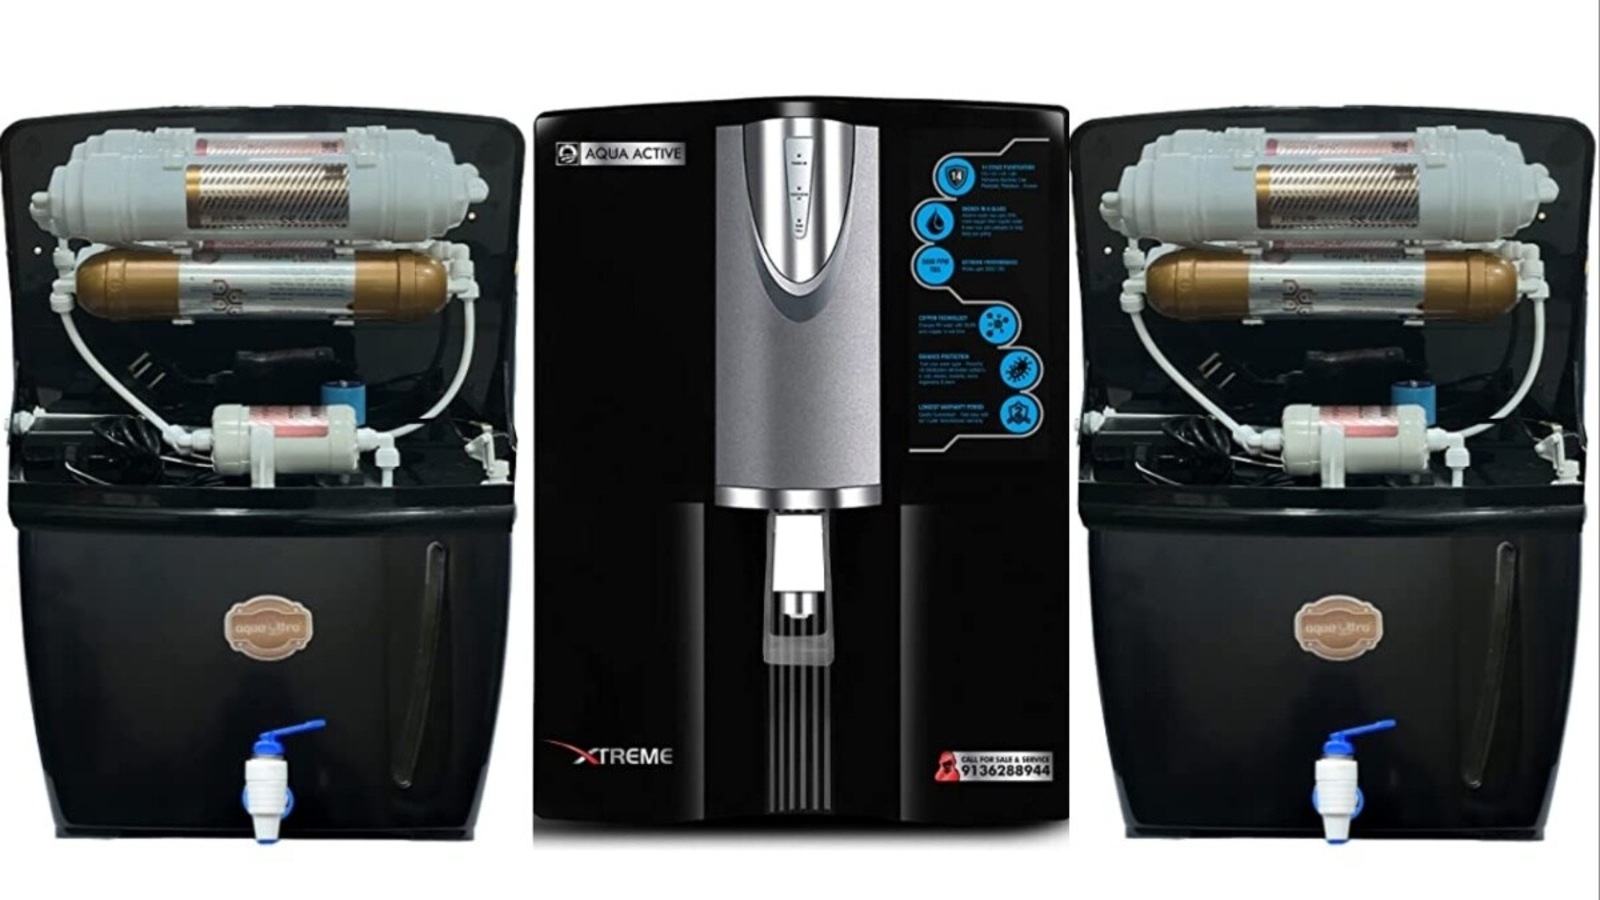 Buying guide: 10 best water purifiers in India for home